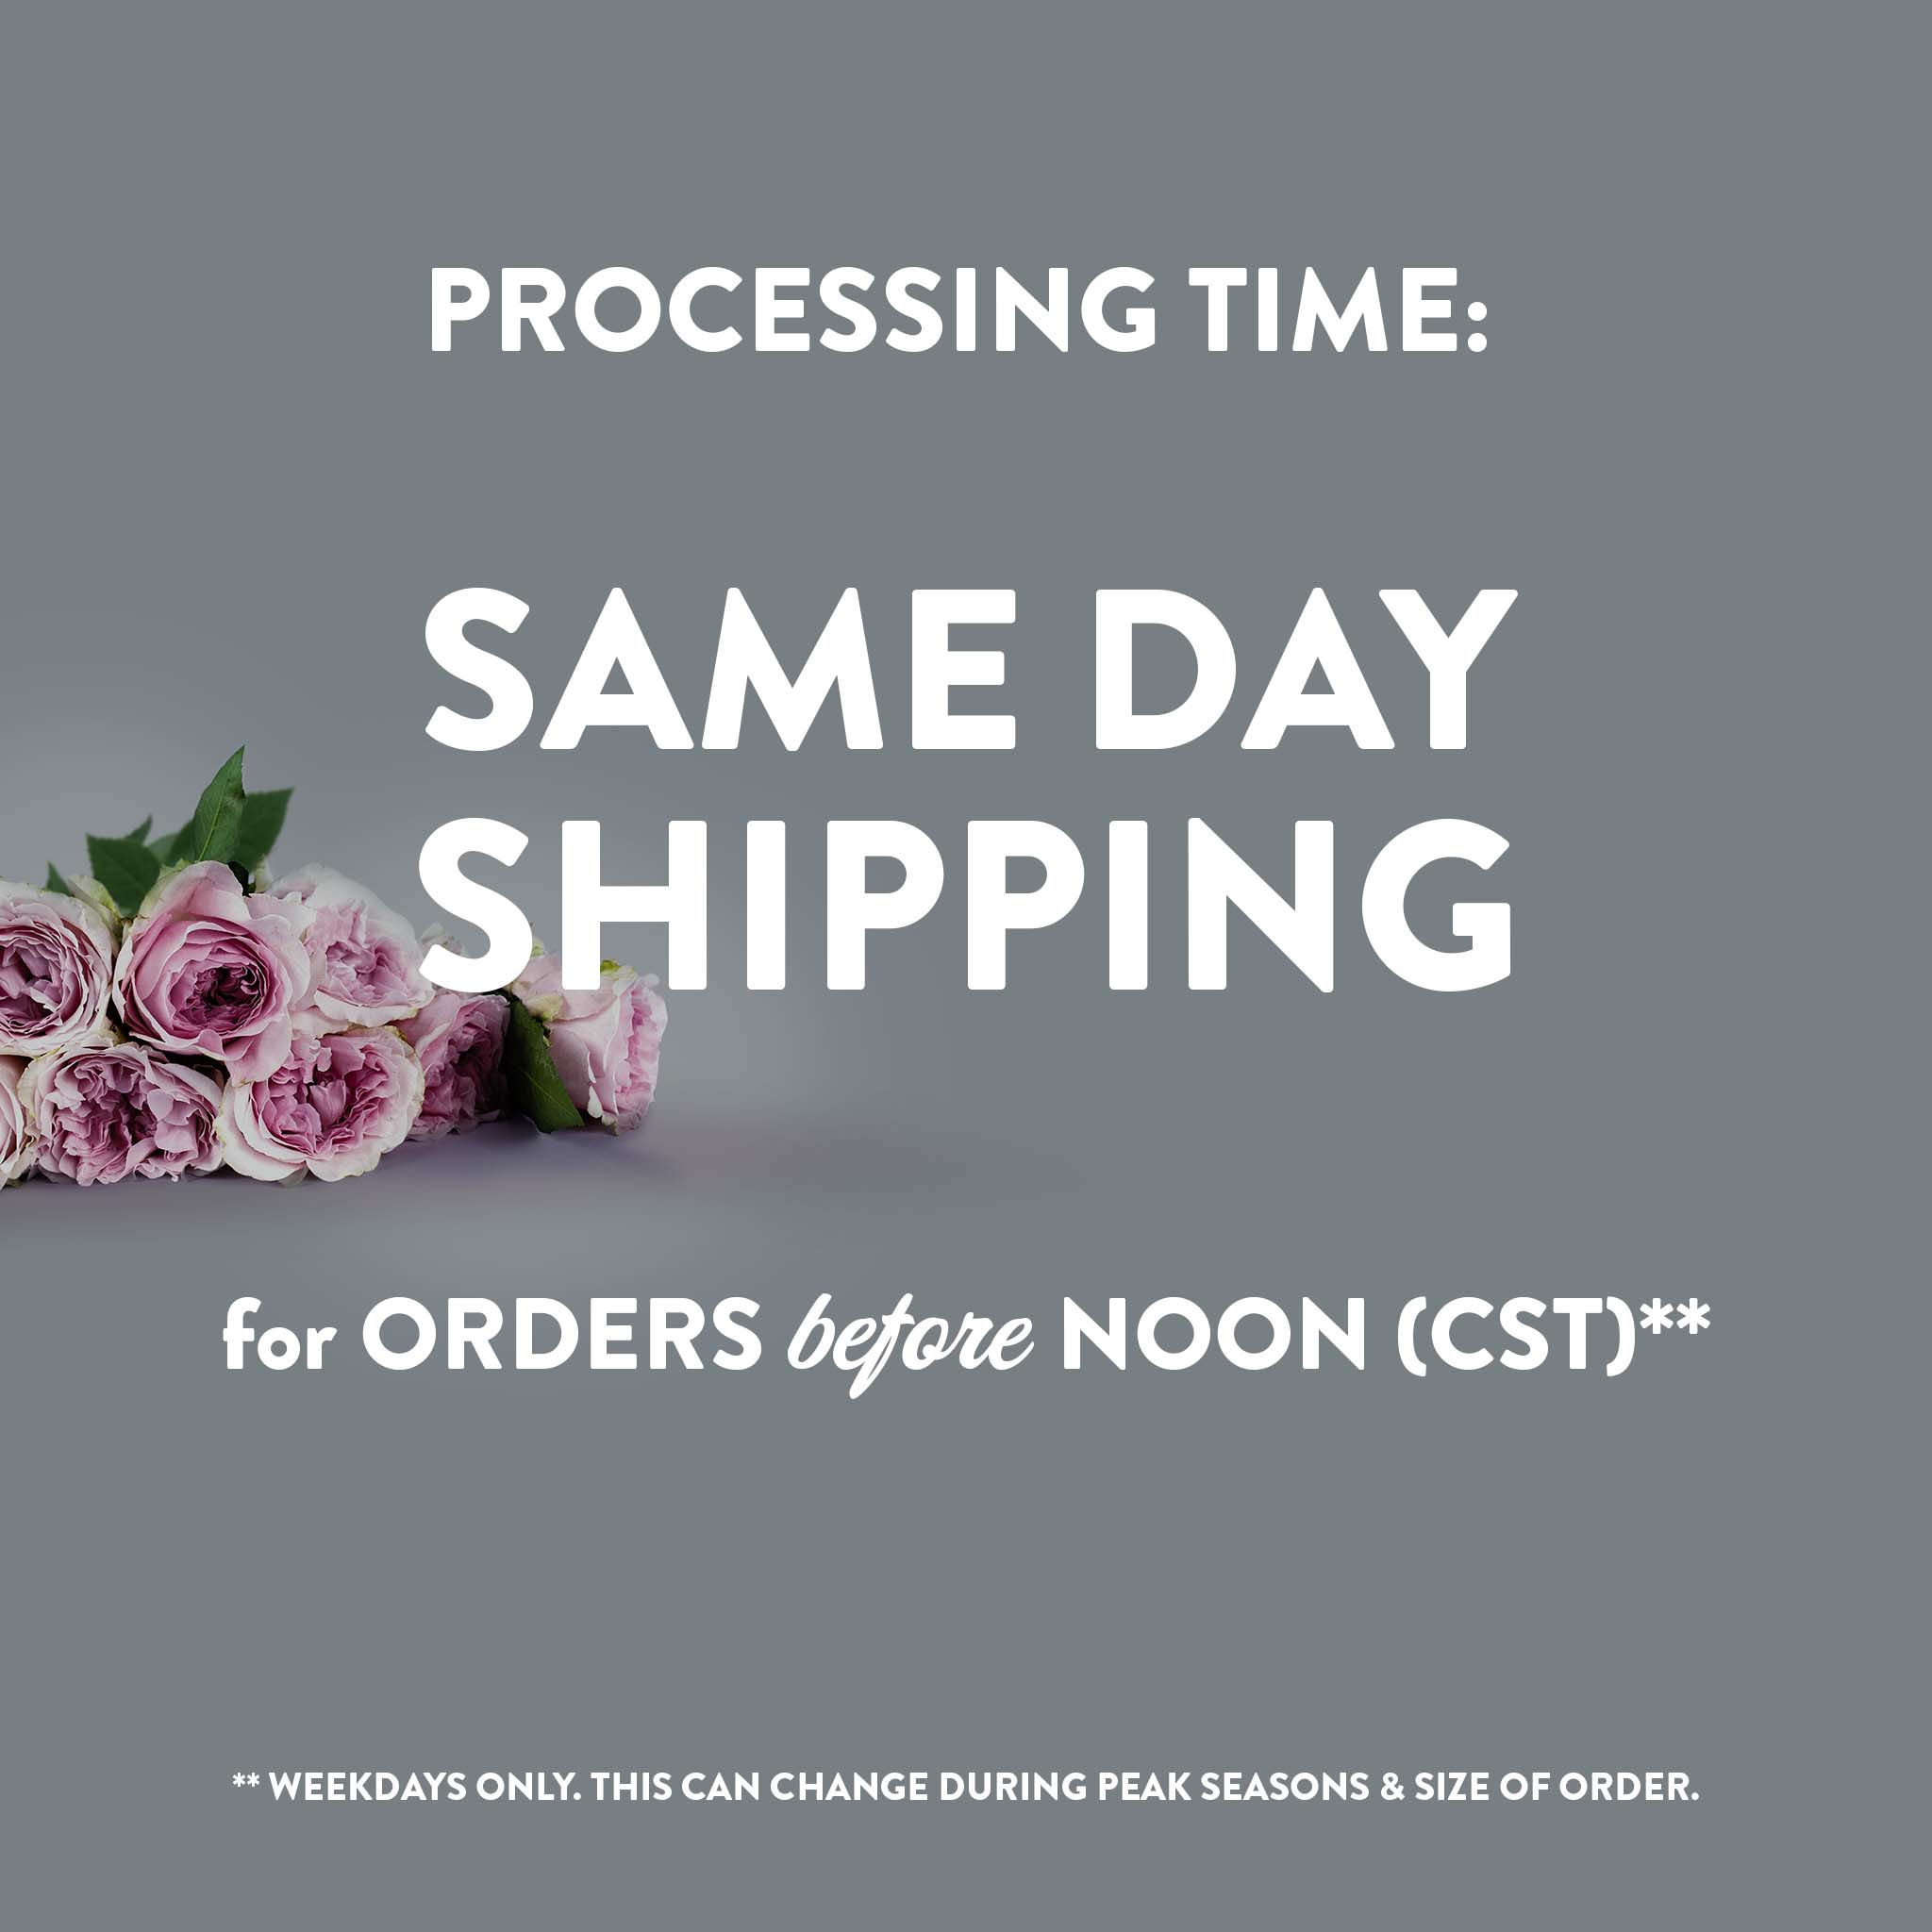 A grey background with a bouquet of roses. White text that reads Processing Time: Same day shipping for orders before noon (CST)**. At the very bottom in smaller text reads: ** Weekdays only. This can change during peak seasons & size of order.